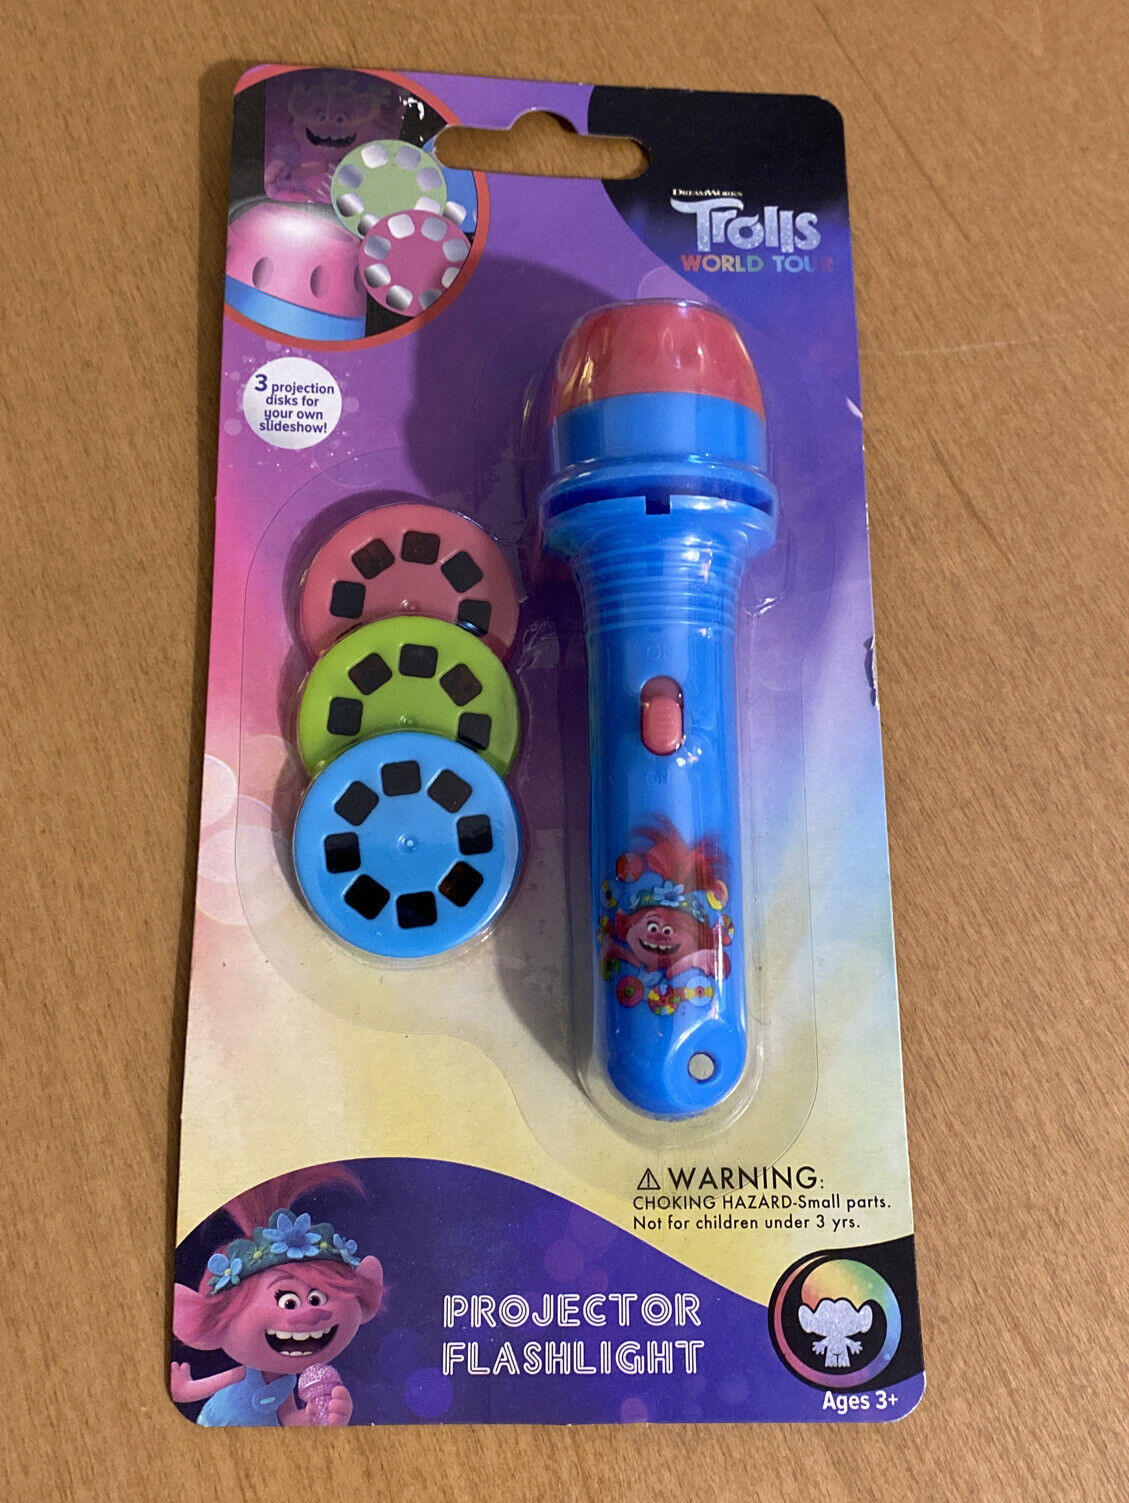 Trolls Gorgeous World Tour Projector Flashlight Disks + New products, world's highest quality popular! With 3 Projection